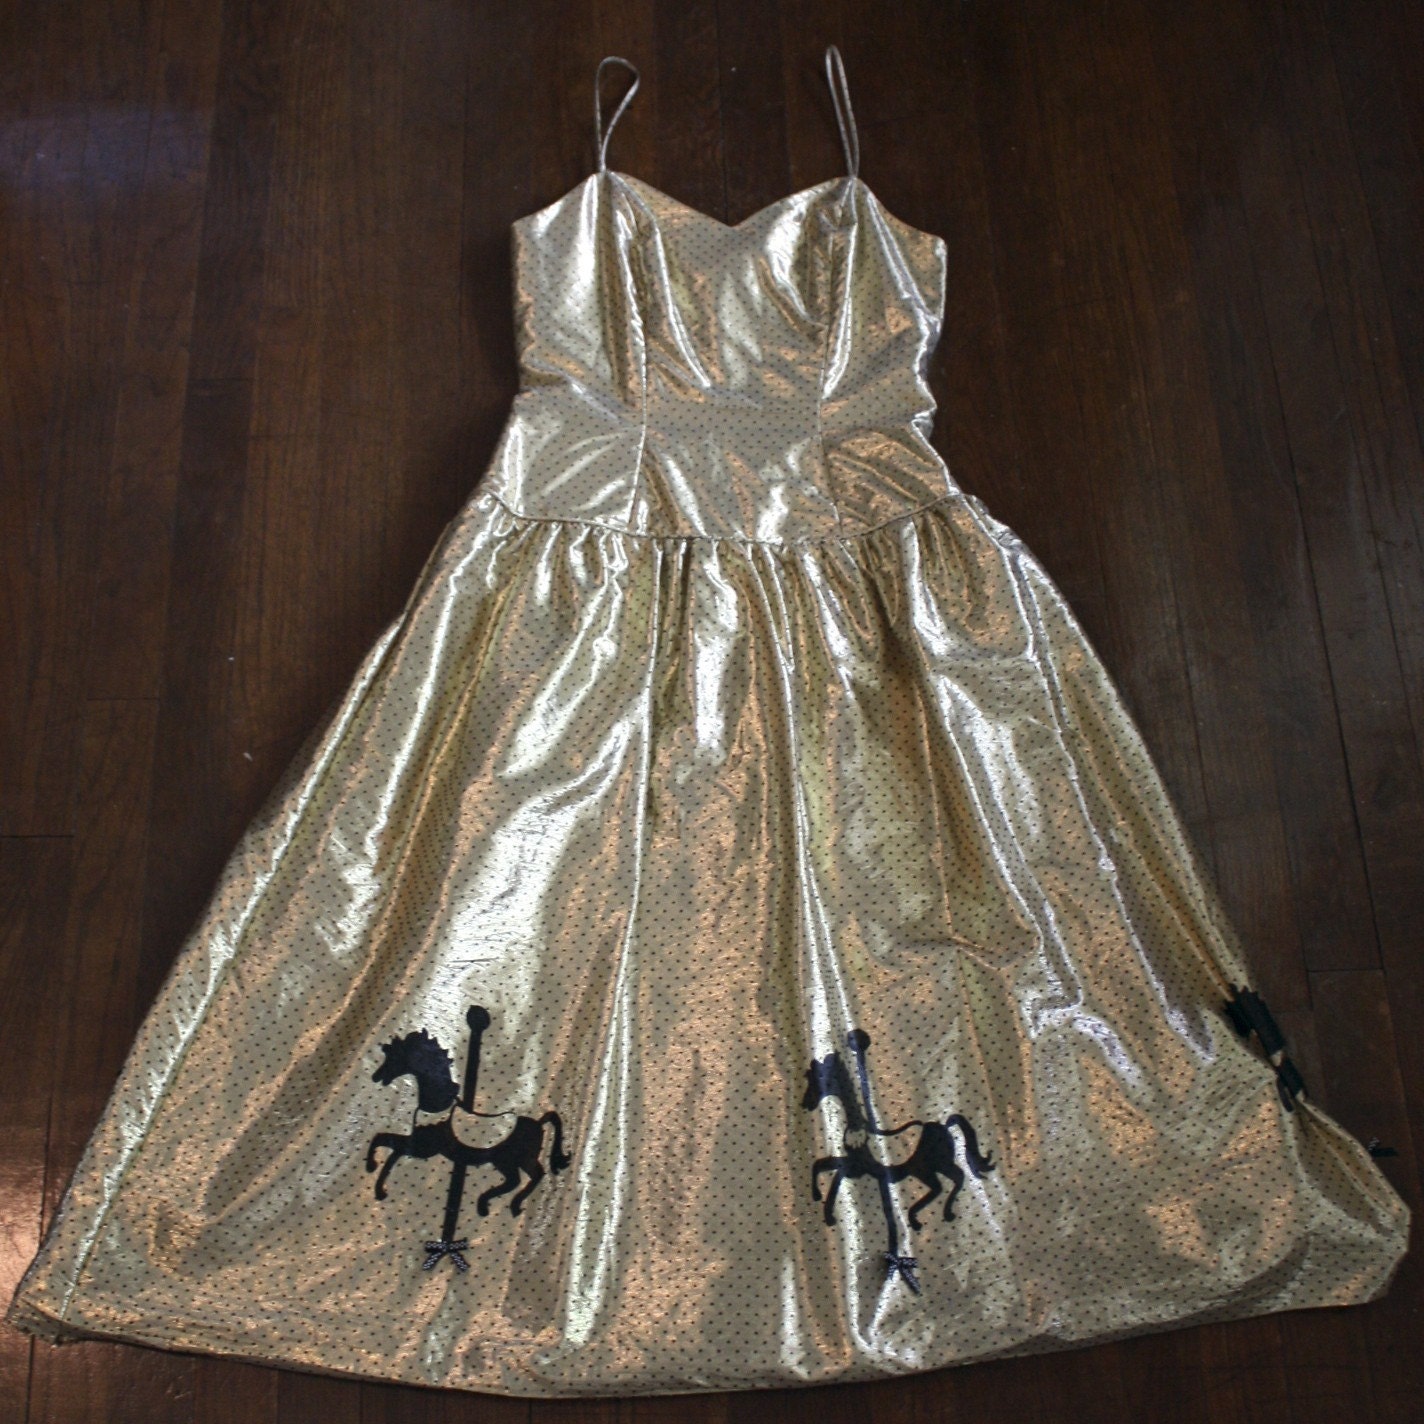 Gold lame dress with hand painted carousel horses